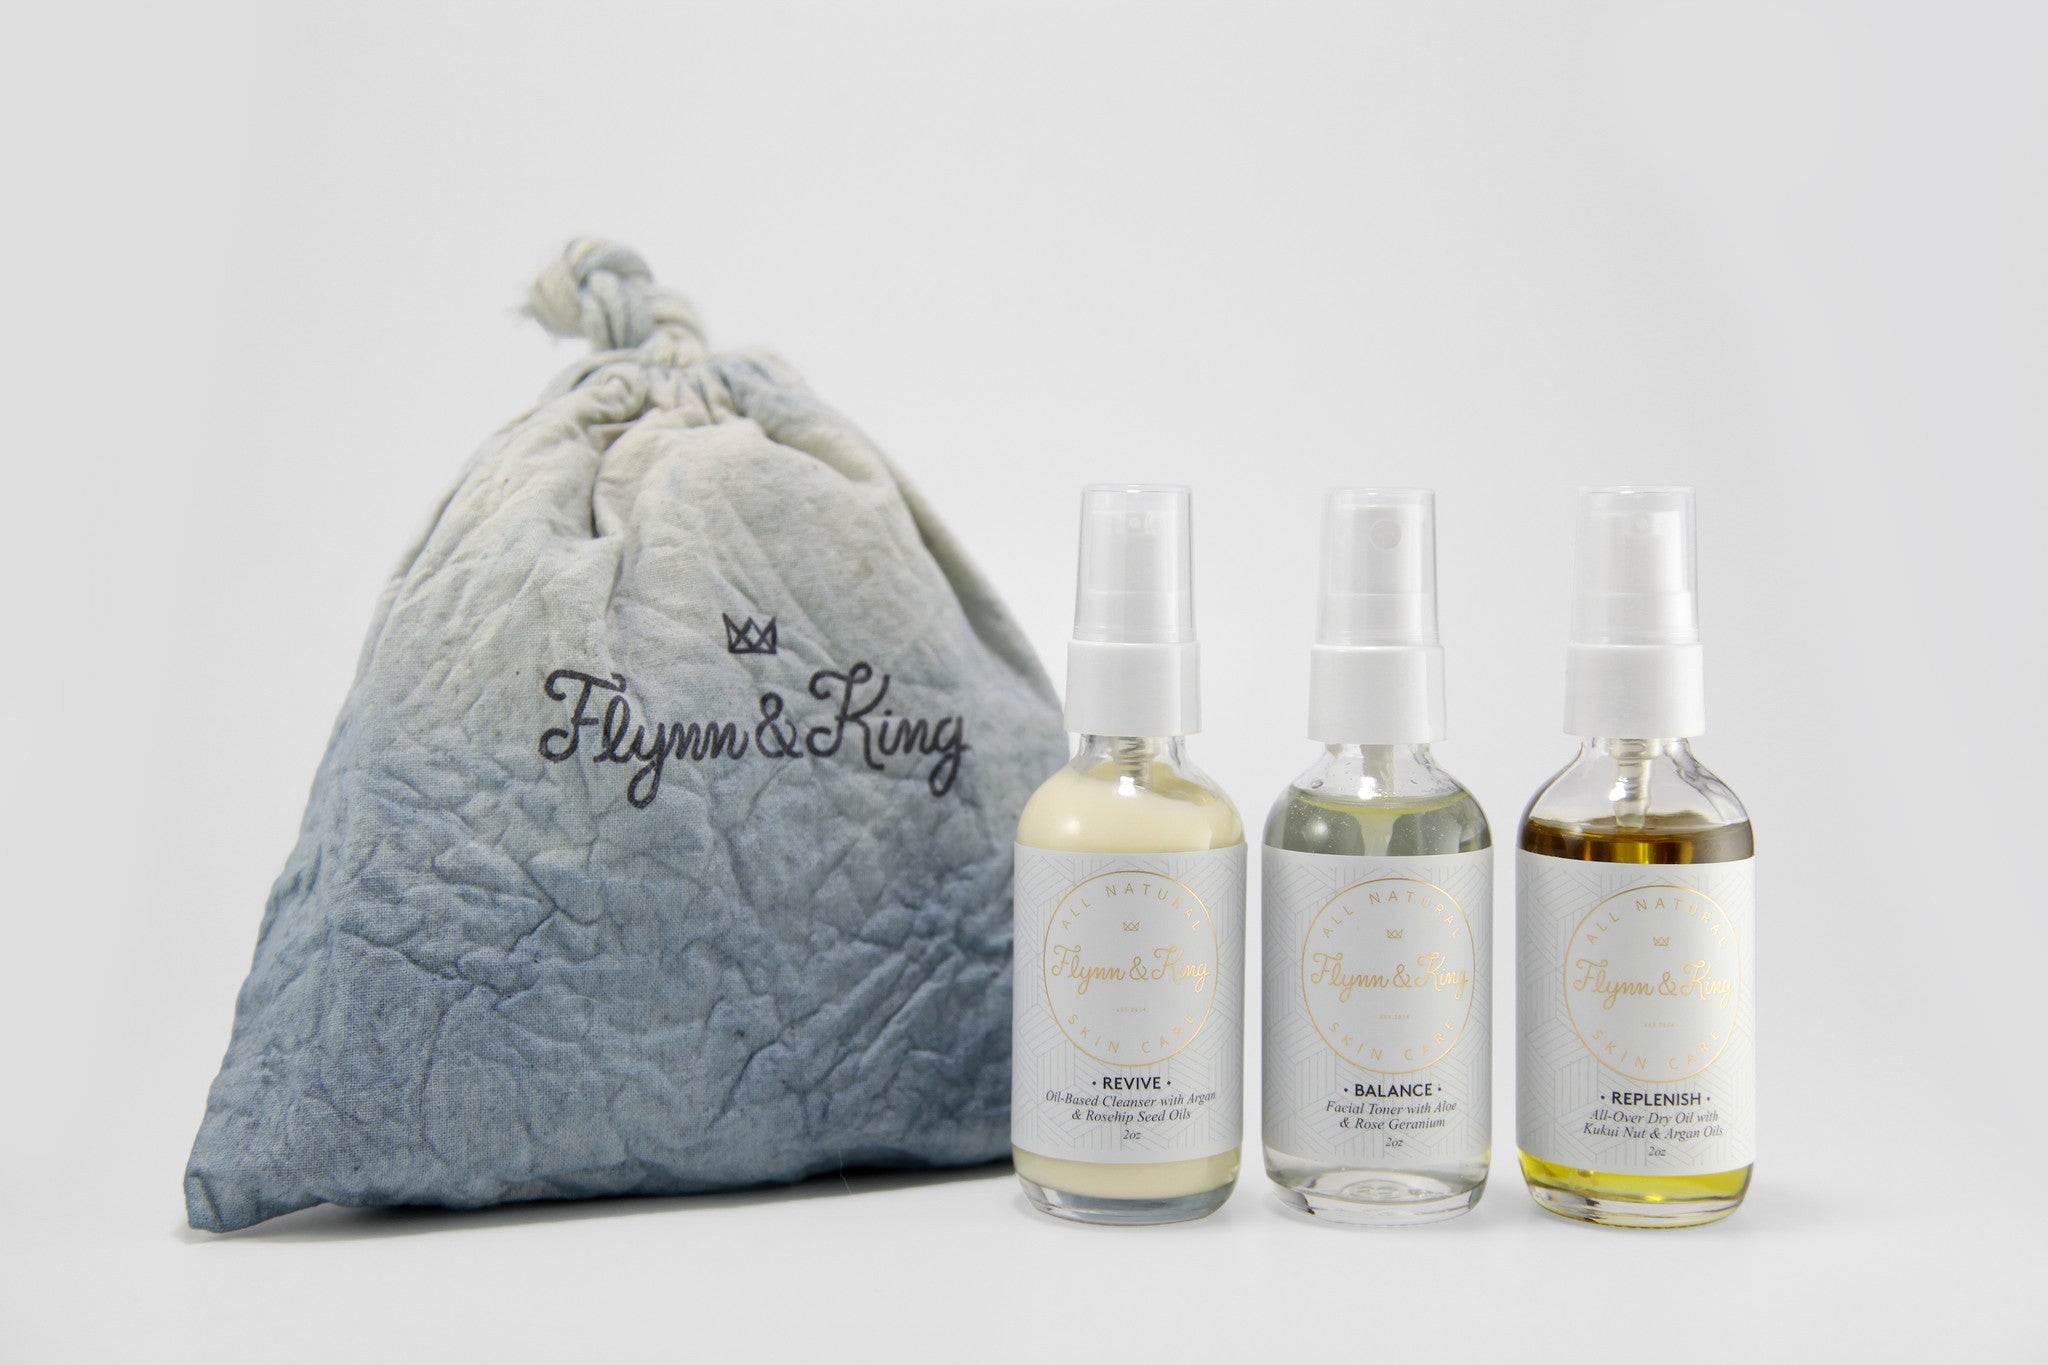 Weekender Set: Sampler of travel skin care with Revive Oil-Based Cleanser, Balance Aloe and Rose Geranium Toner, and Replenish All-Over Oil with Argan and Kukui Nut Oils